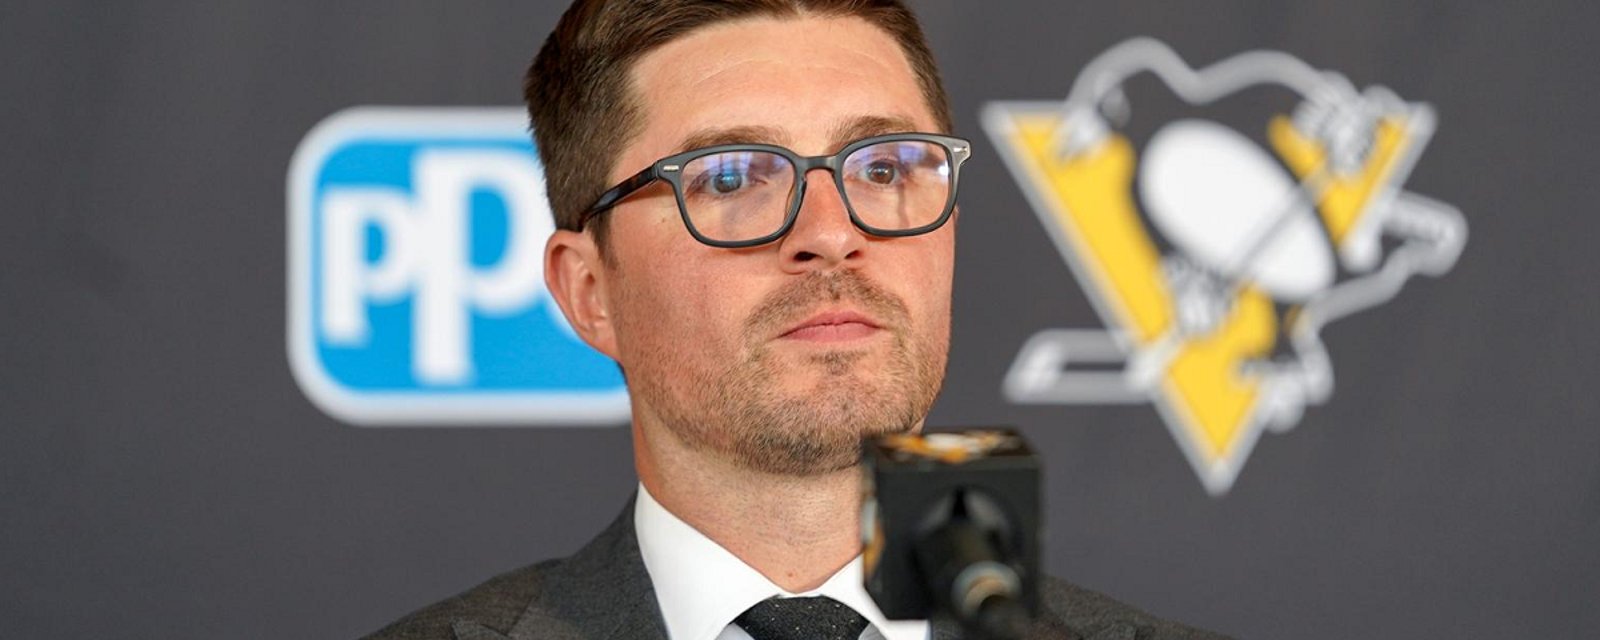 Dubas' first move with the Penguins may send a veteran packing.